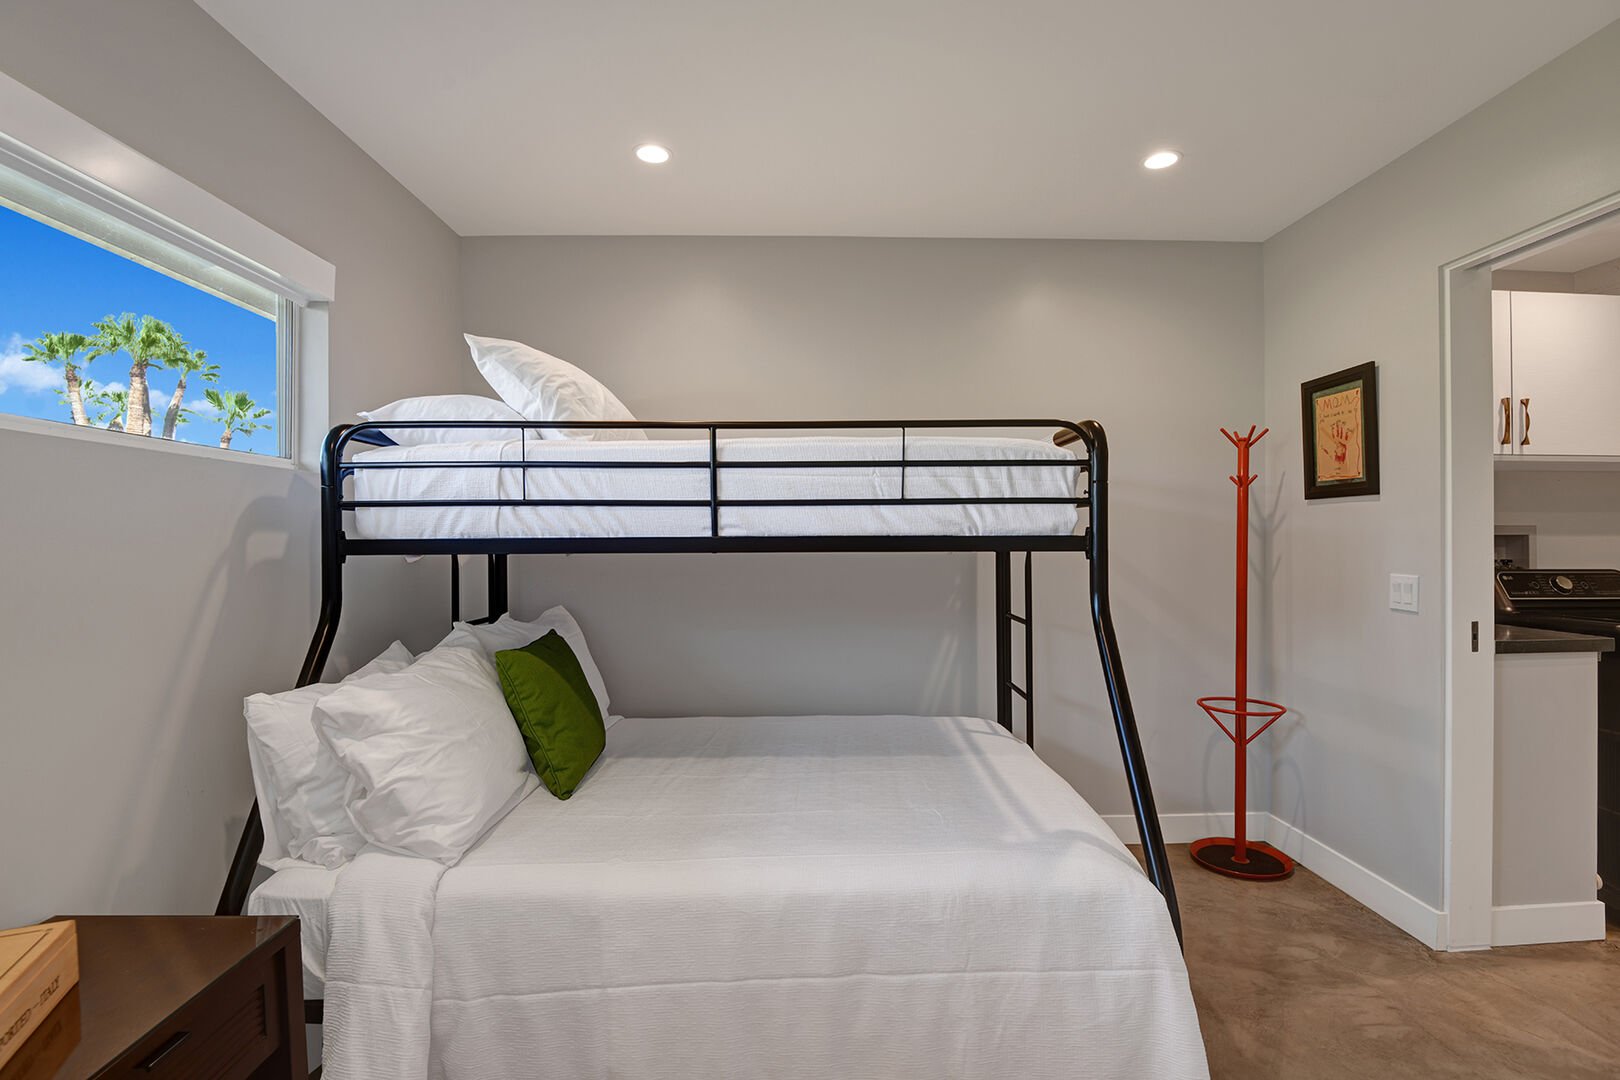 Full size and twin size bunk room that connects to the master bathroom and laundry room.  It's situated in between these two rooms.  Two entrances to the bunk room, through living room or master bath.  Separated with pocket doors for privacy.  Has its own smart tv mounted on the wall.